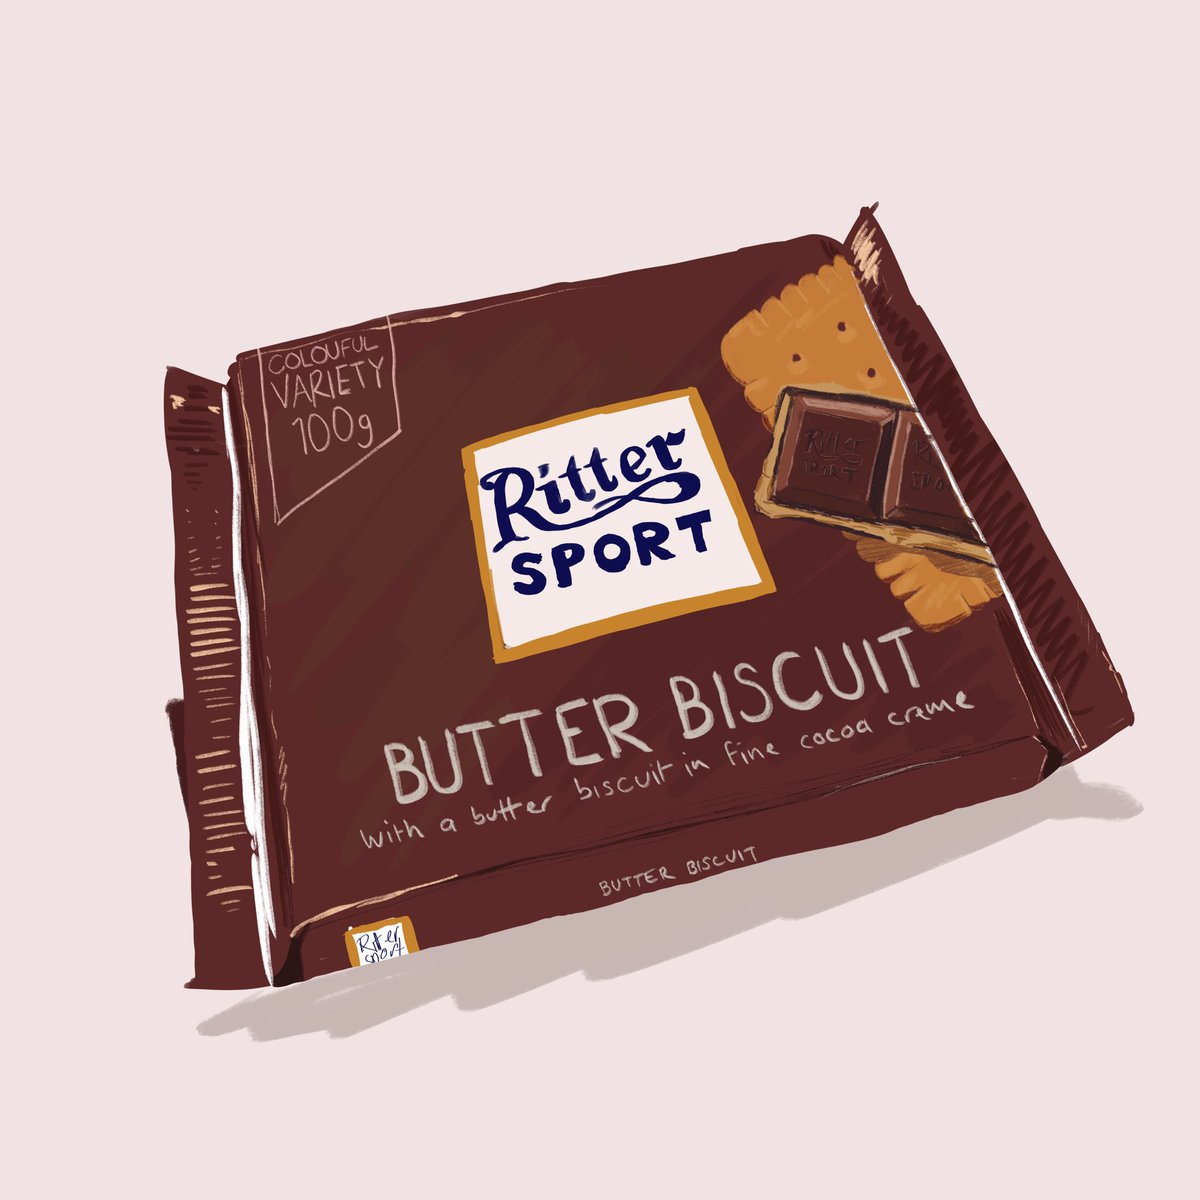 Butter Biscuit is one of the all time classic  @ritter_sport bars. I know it has a lot of fans out there